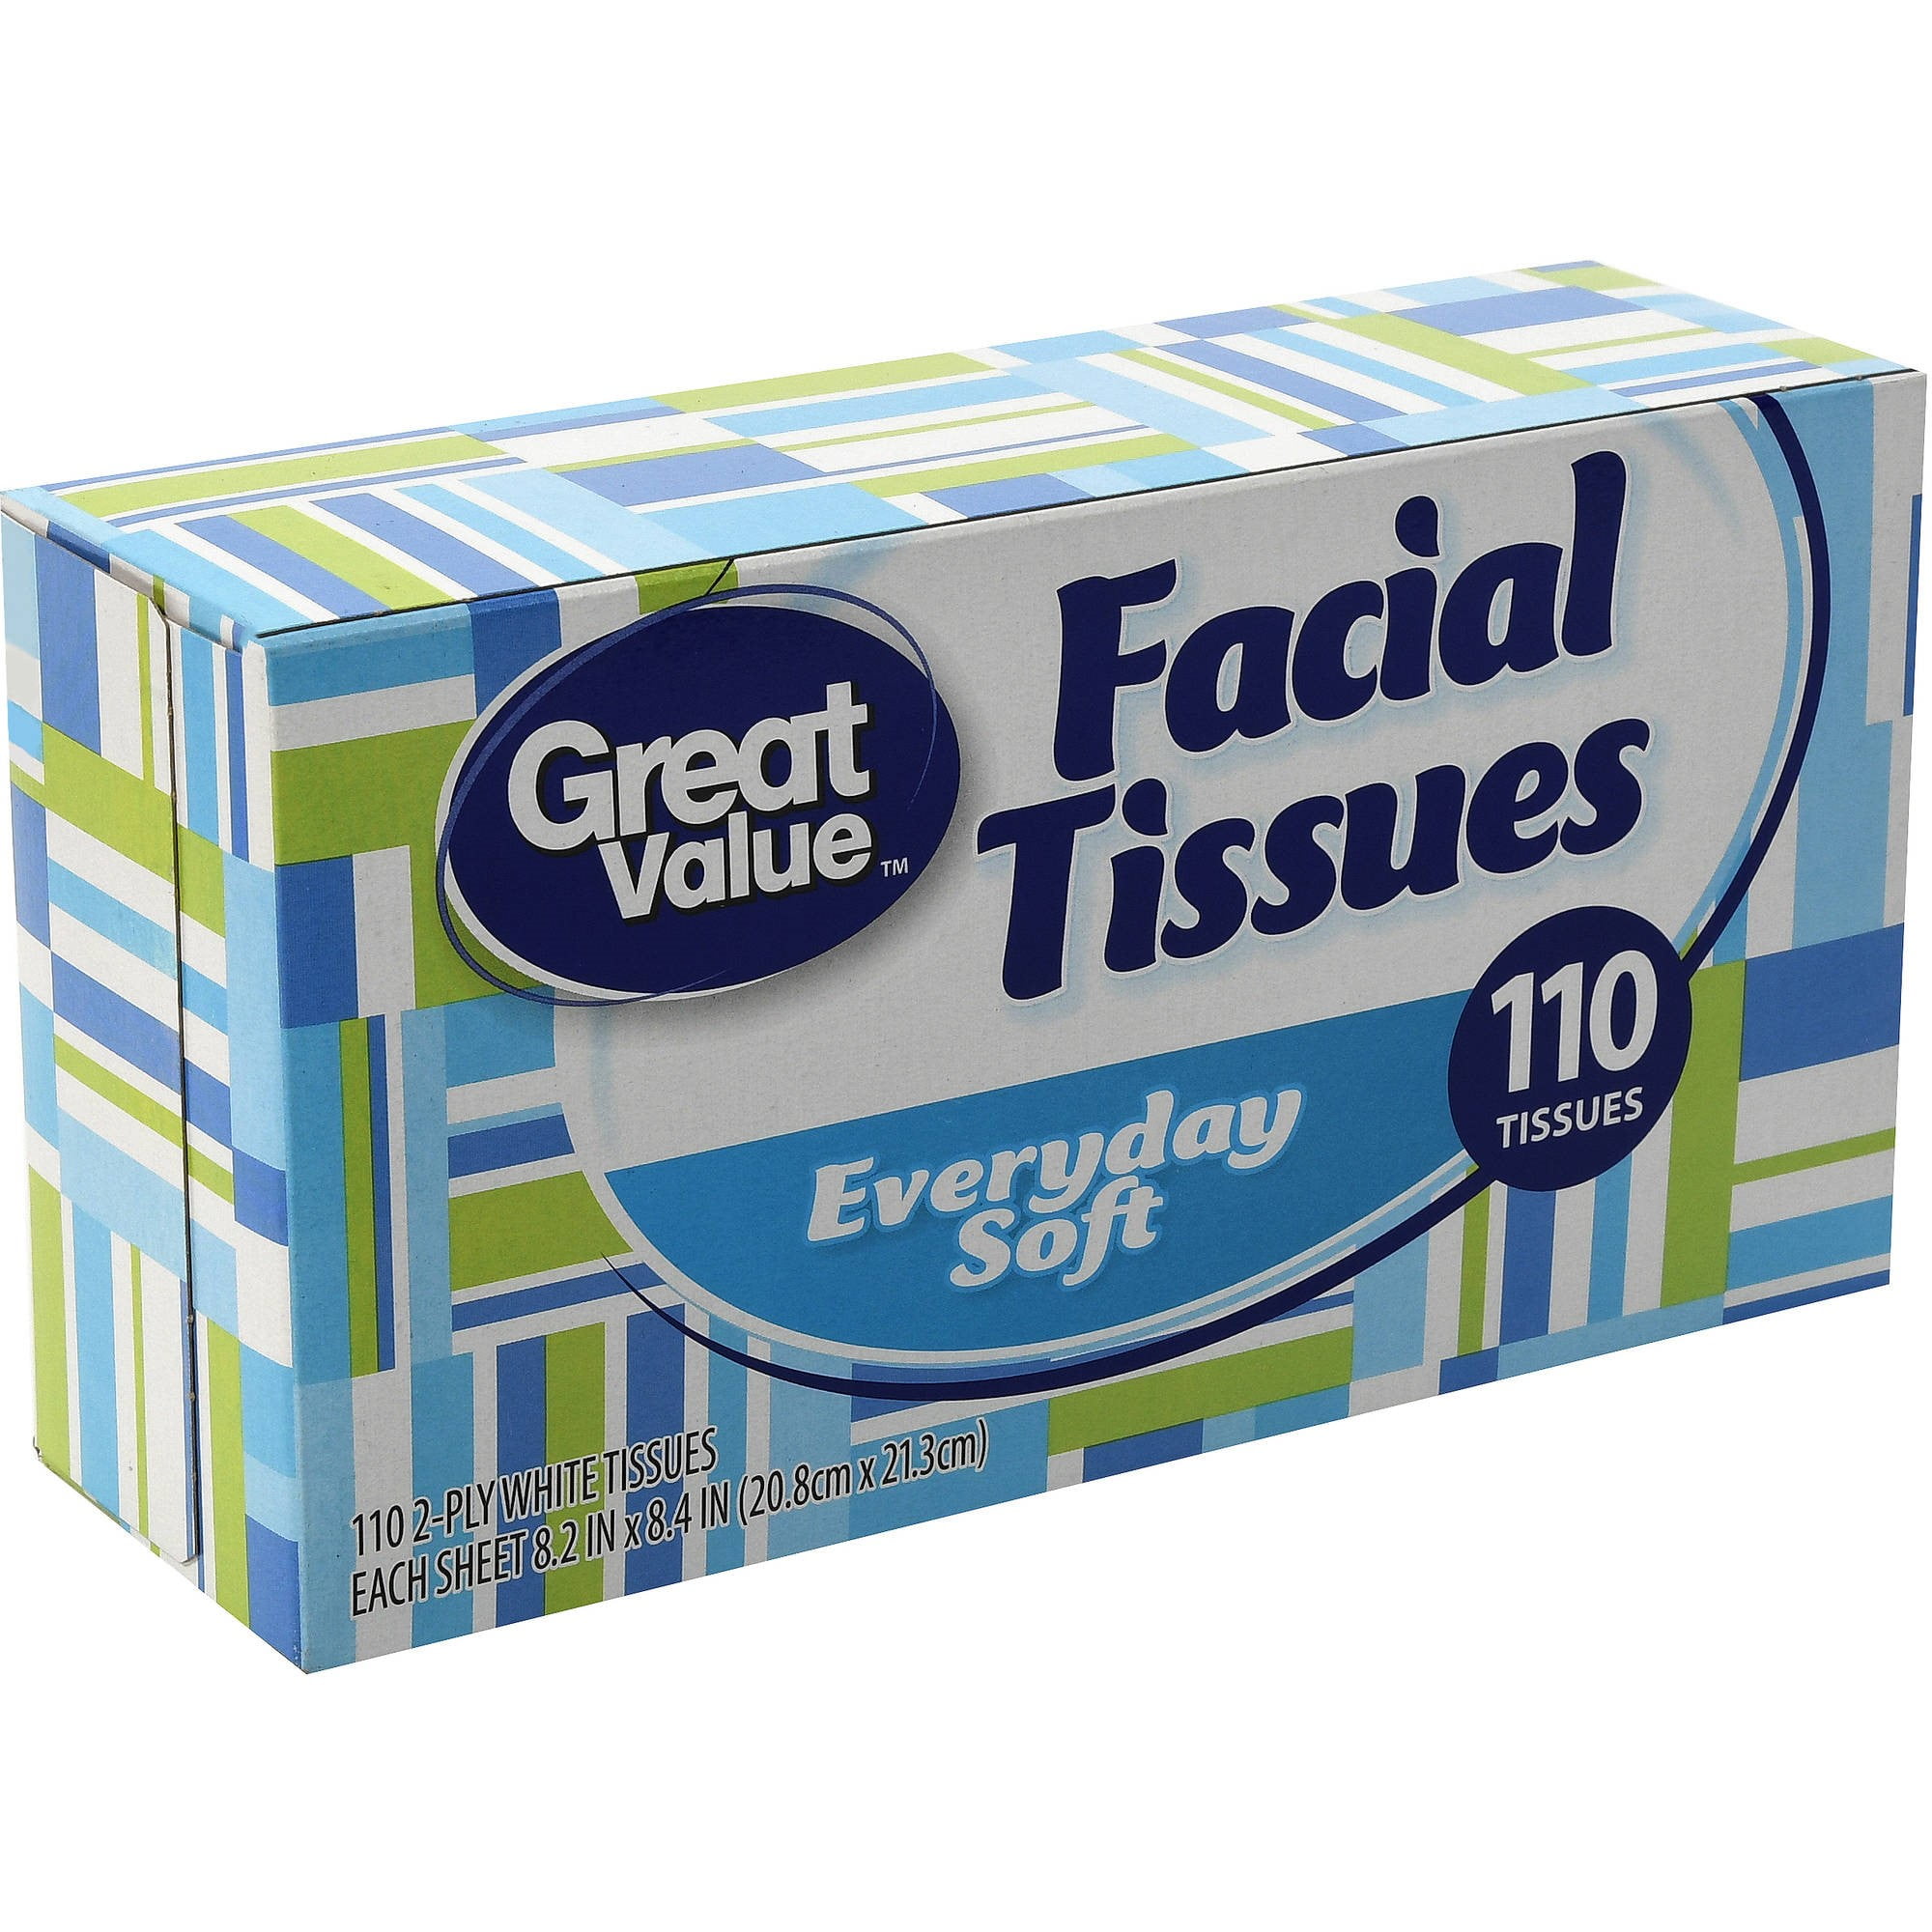 Great Value Everyday Soft Facial Tissues, White, 110 Sheets - Walmart.com